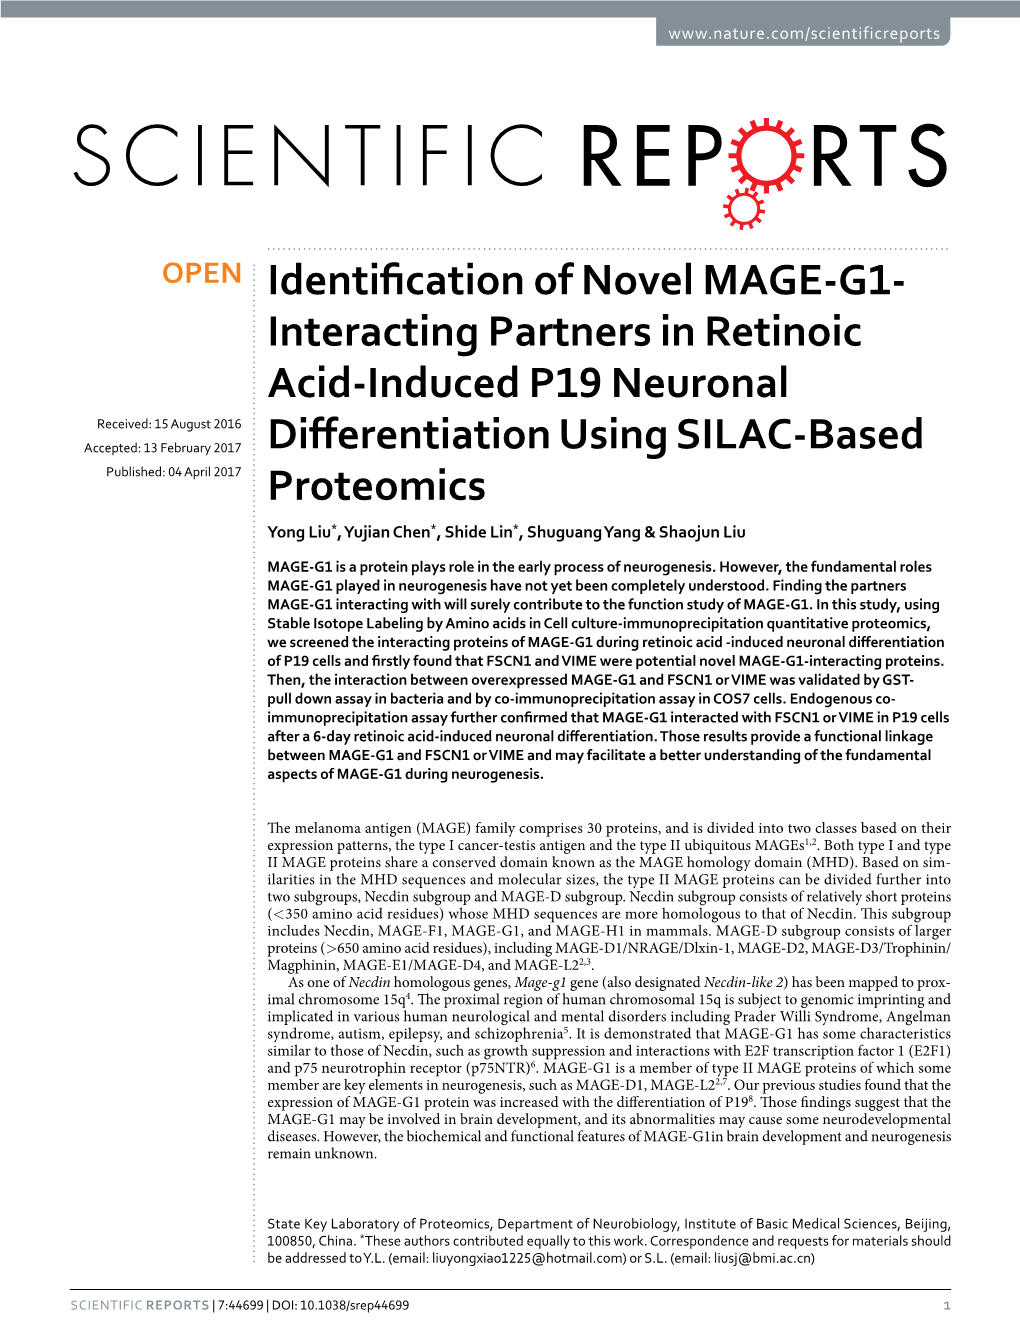 Identification of Novel MAGE-G1-Interacting Partners in Retinoic Acid-Induced P19 Neuronal Differentiation Using SILAC-Based Proteomics